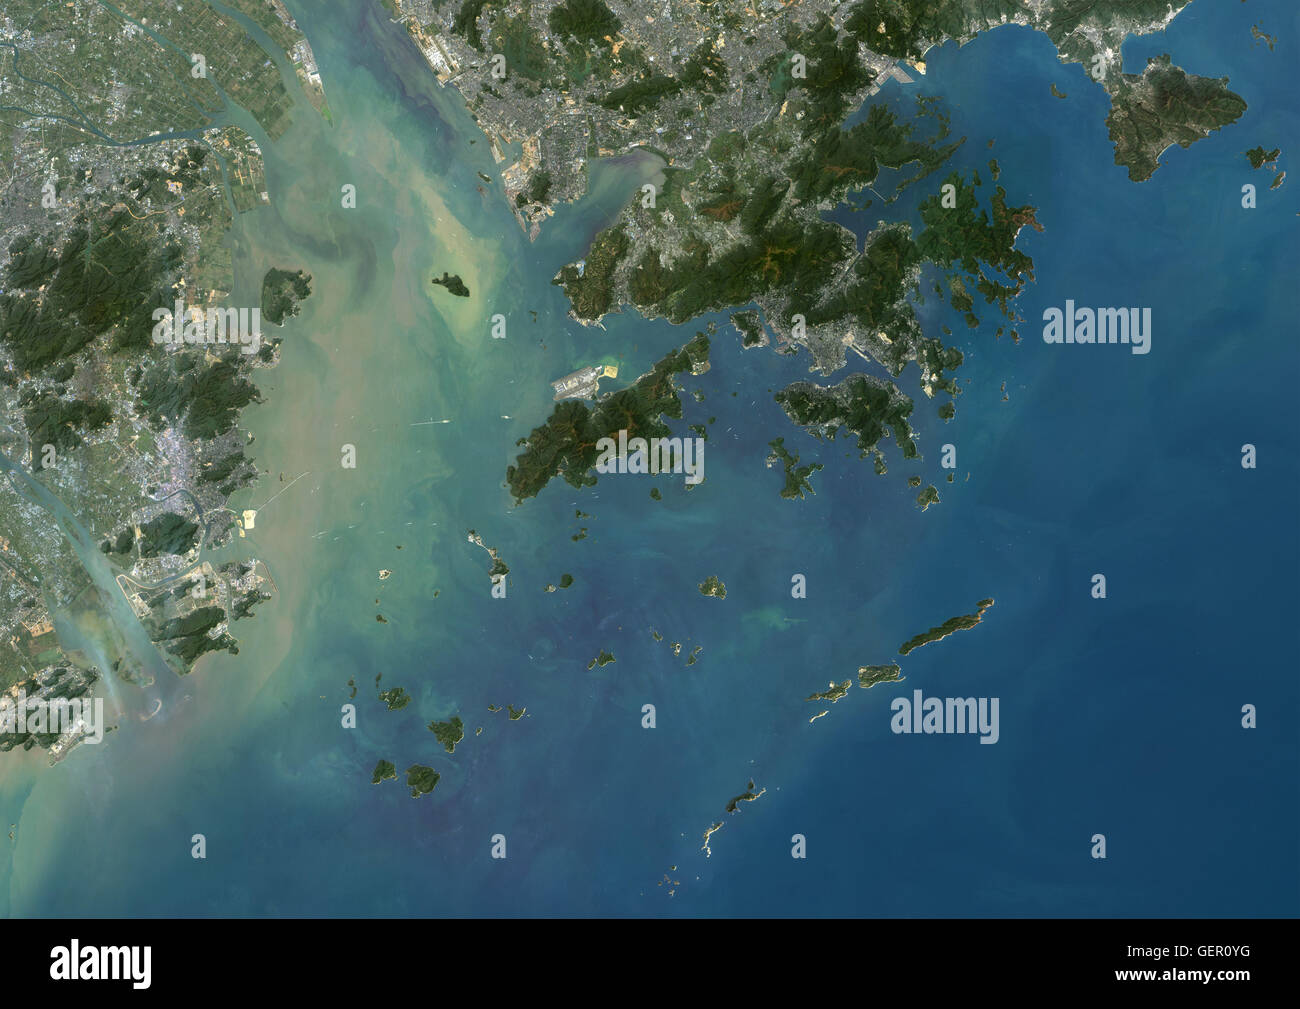 Satellite view of Hong Kong and Macau. This image was compiled from data acquired by Landsat 8 satellite in 2015. Stock Photo